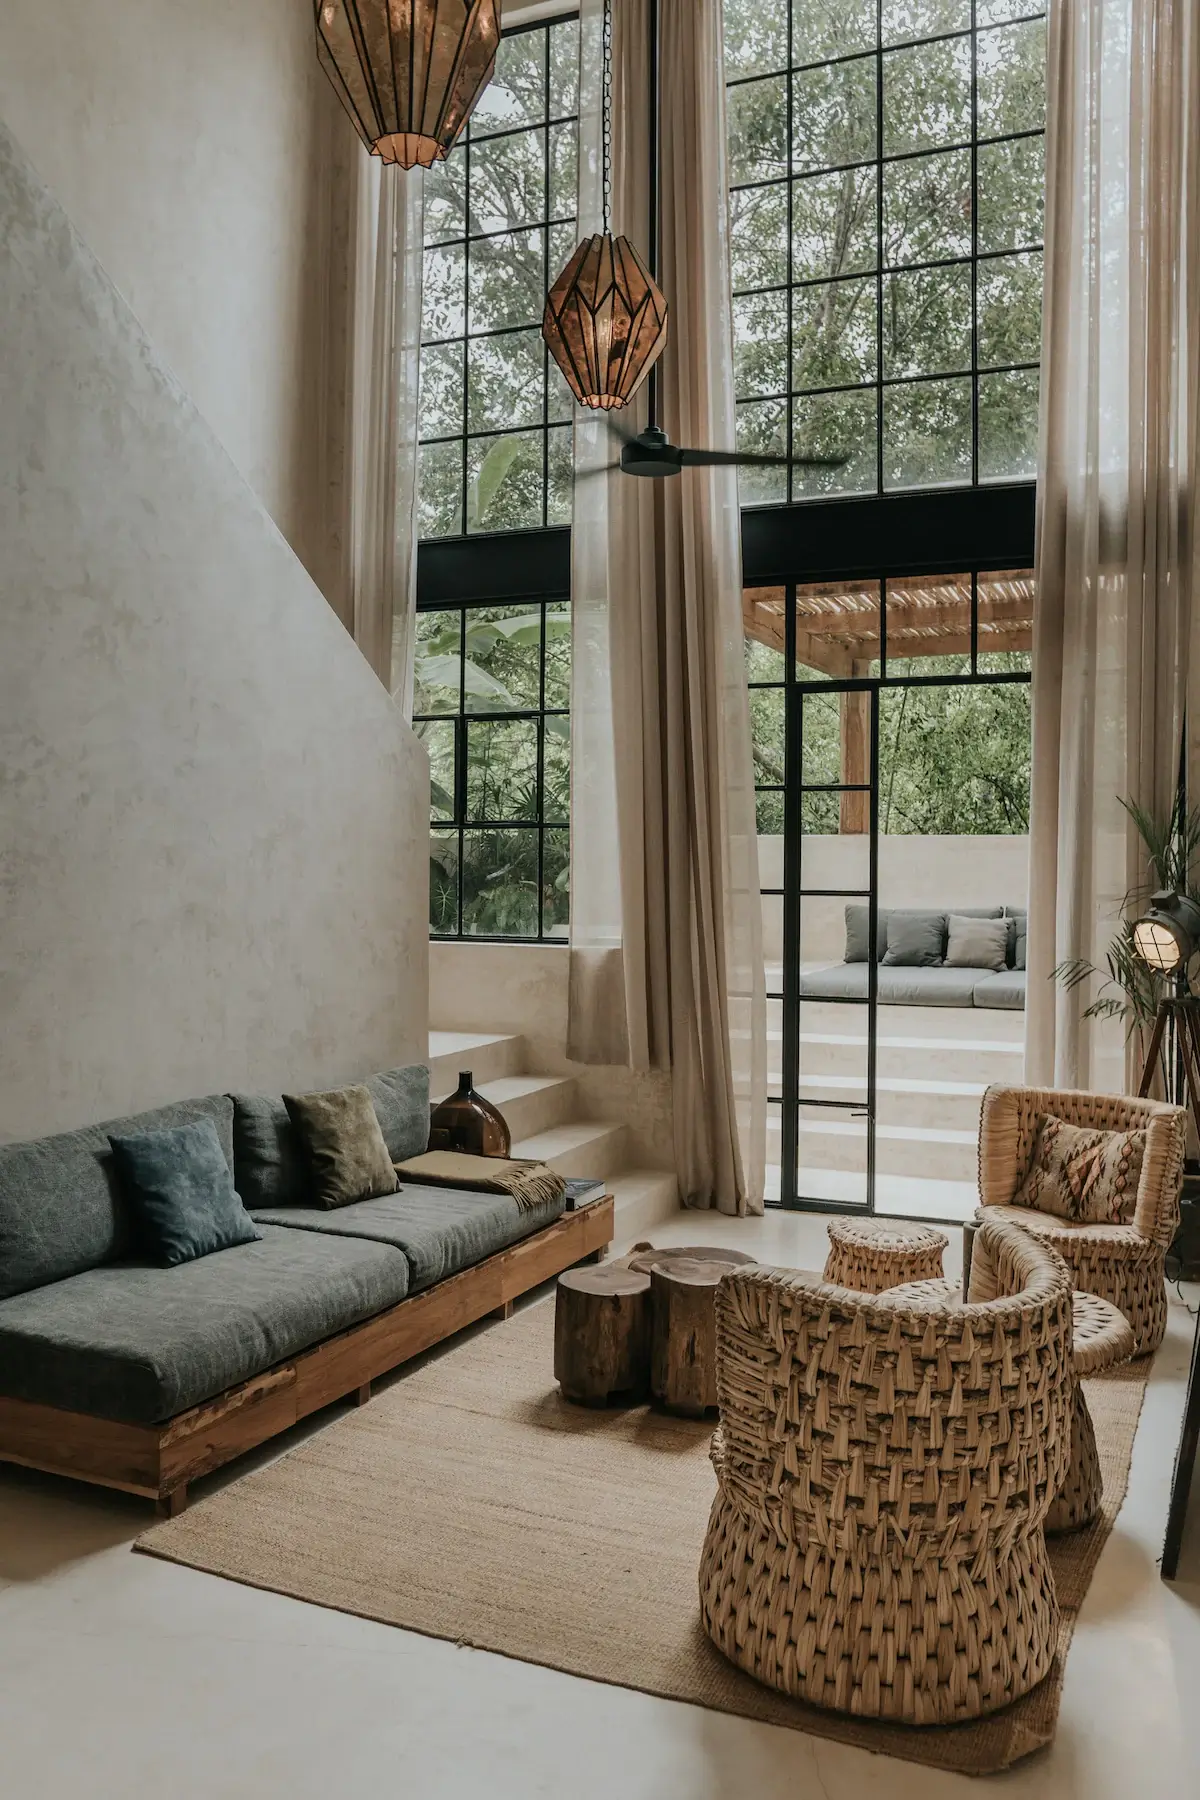 A Tulum Airbnb in an Architectural Building